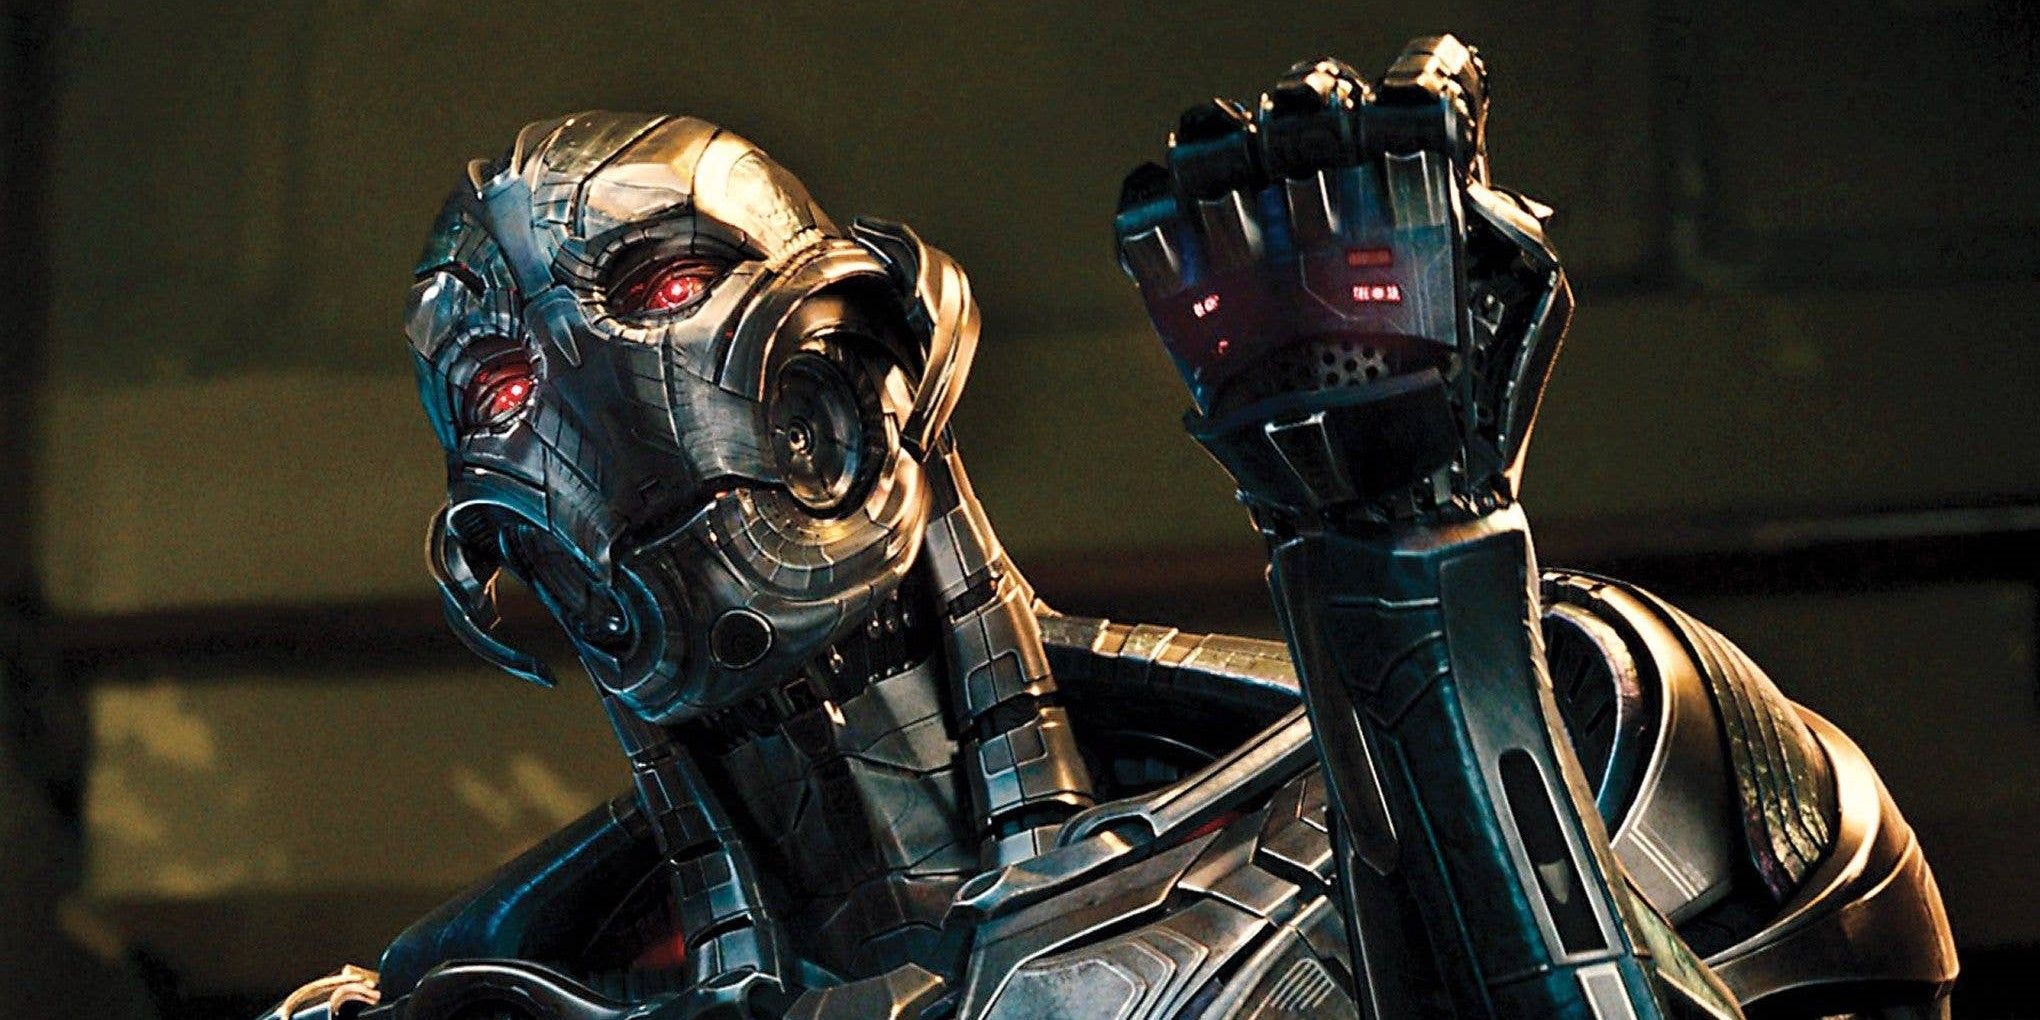 Ultron clutches his fist in Avengers: Age Of Ultron.